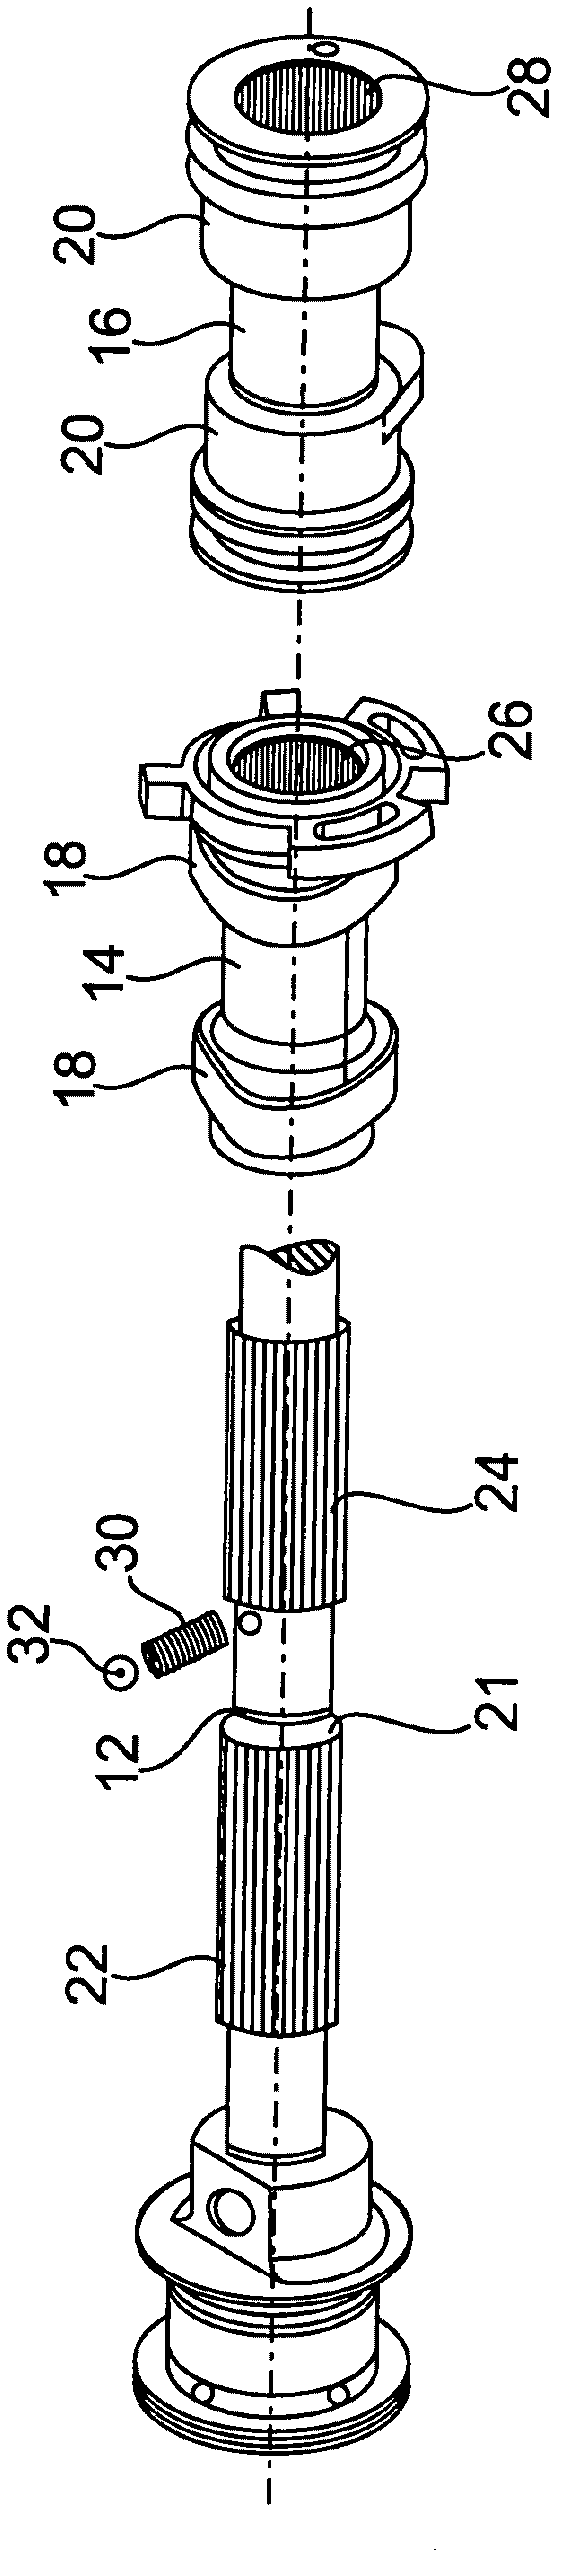 Constructed shaft element, particularly a constructed camshaft for valve controlled internal combustion engines